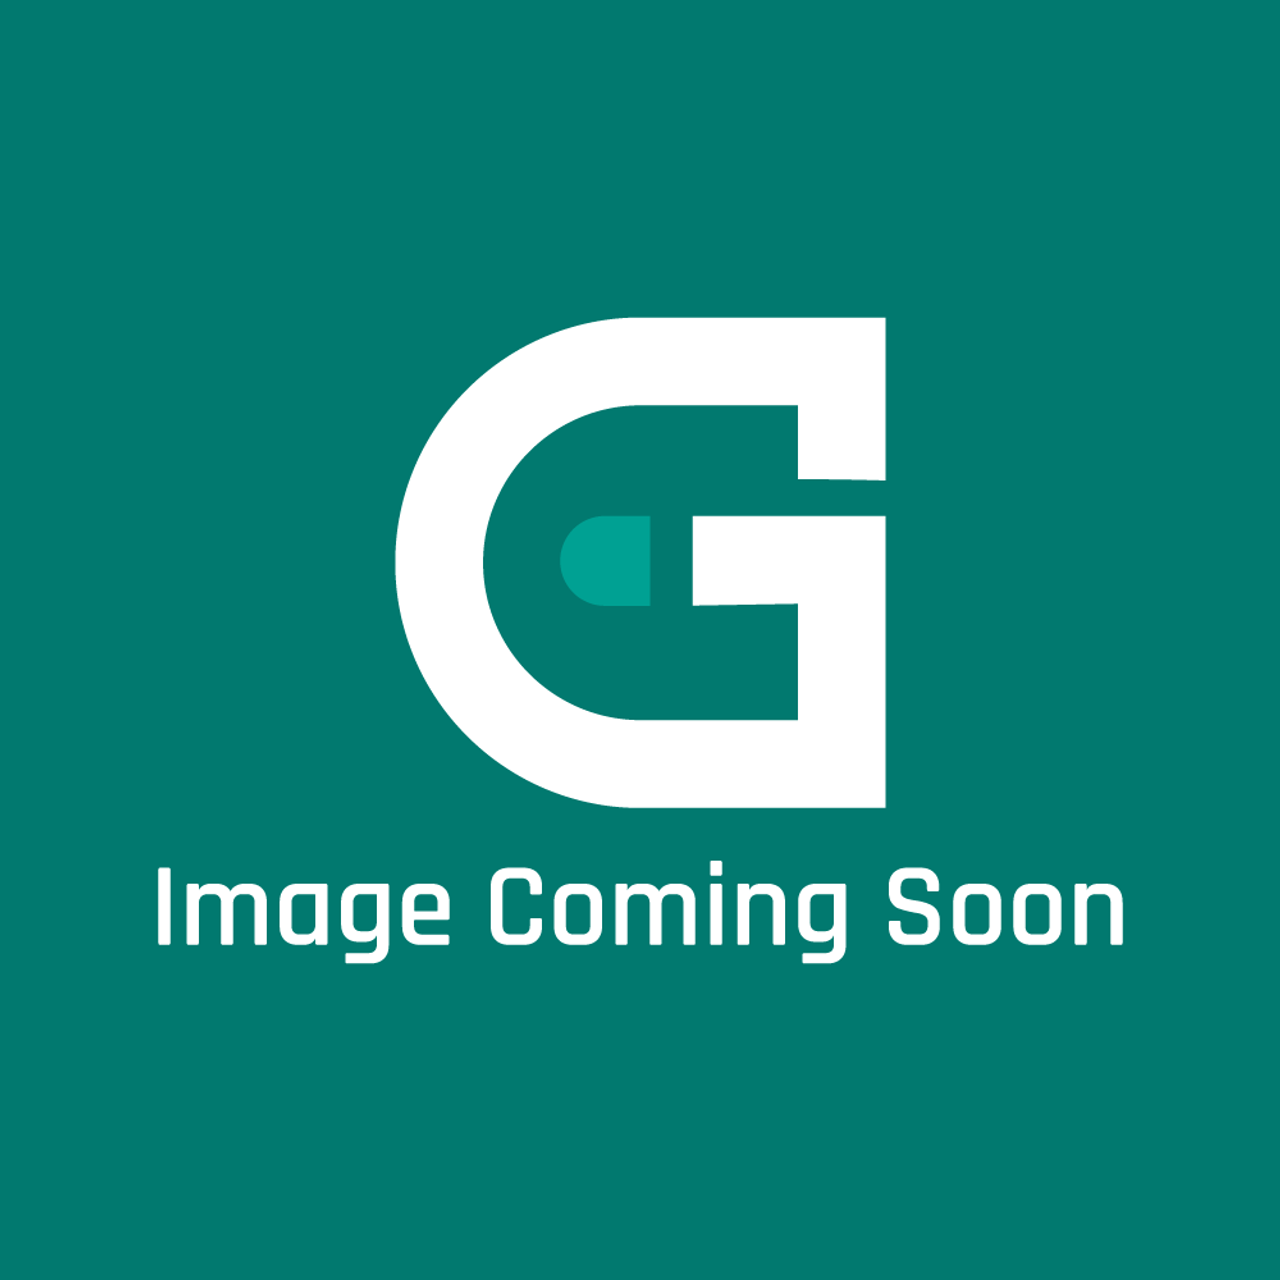 AGA Marvel 095368 0791 - Grill Outer Door Panel - Image Coming Soon!